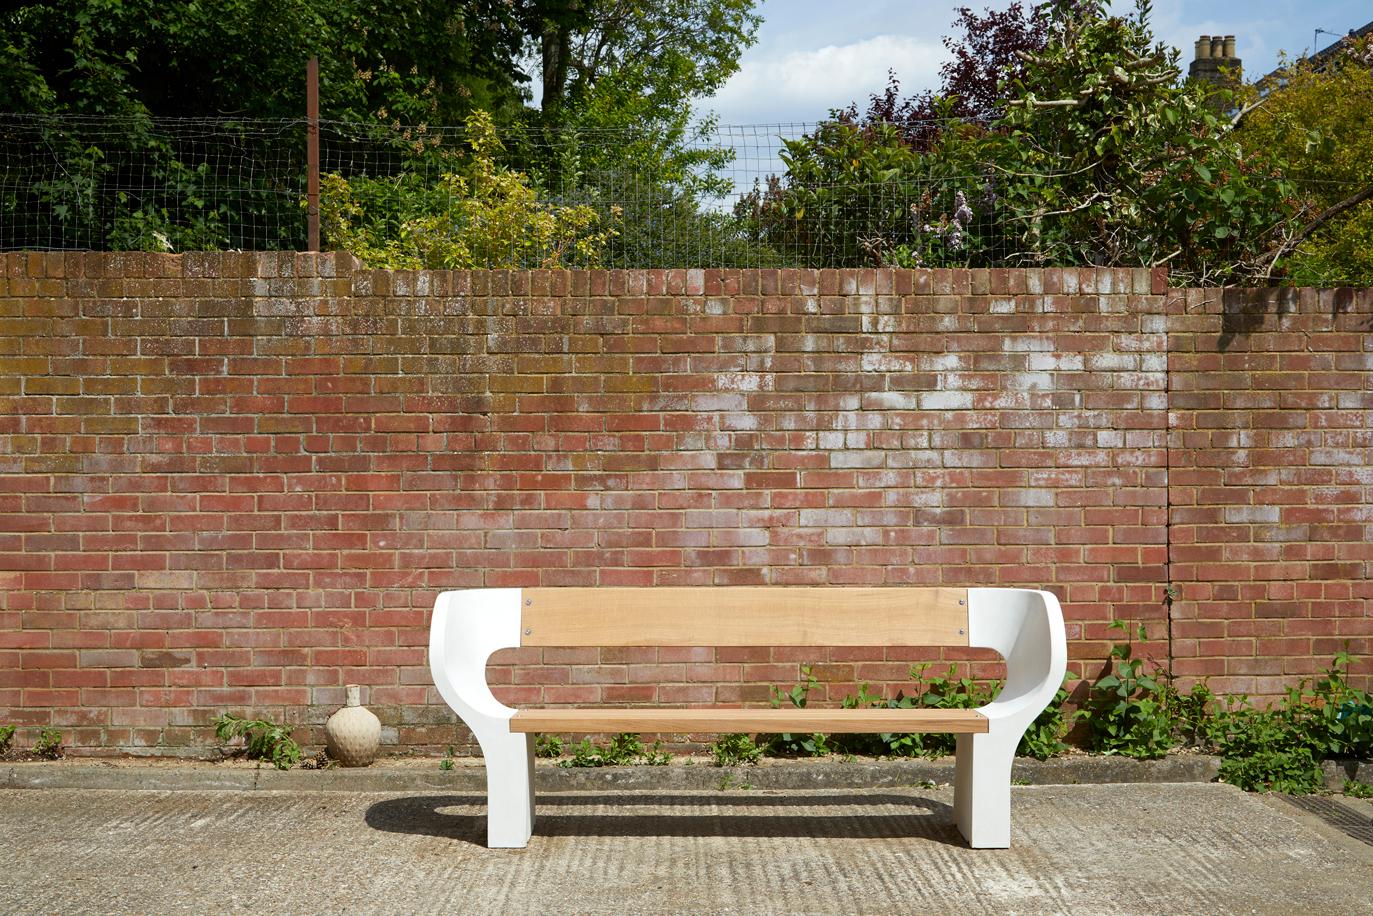 The Snug bench available in three widths, 150cm, 180cm and 200cm. This striking sculptural bench, handcrafted for either the outdoors or inside is made out of glass-reinforced concrete and European oak.

Glass-reinforced concrete considerably